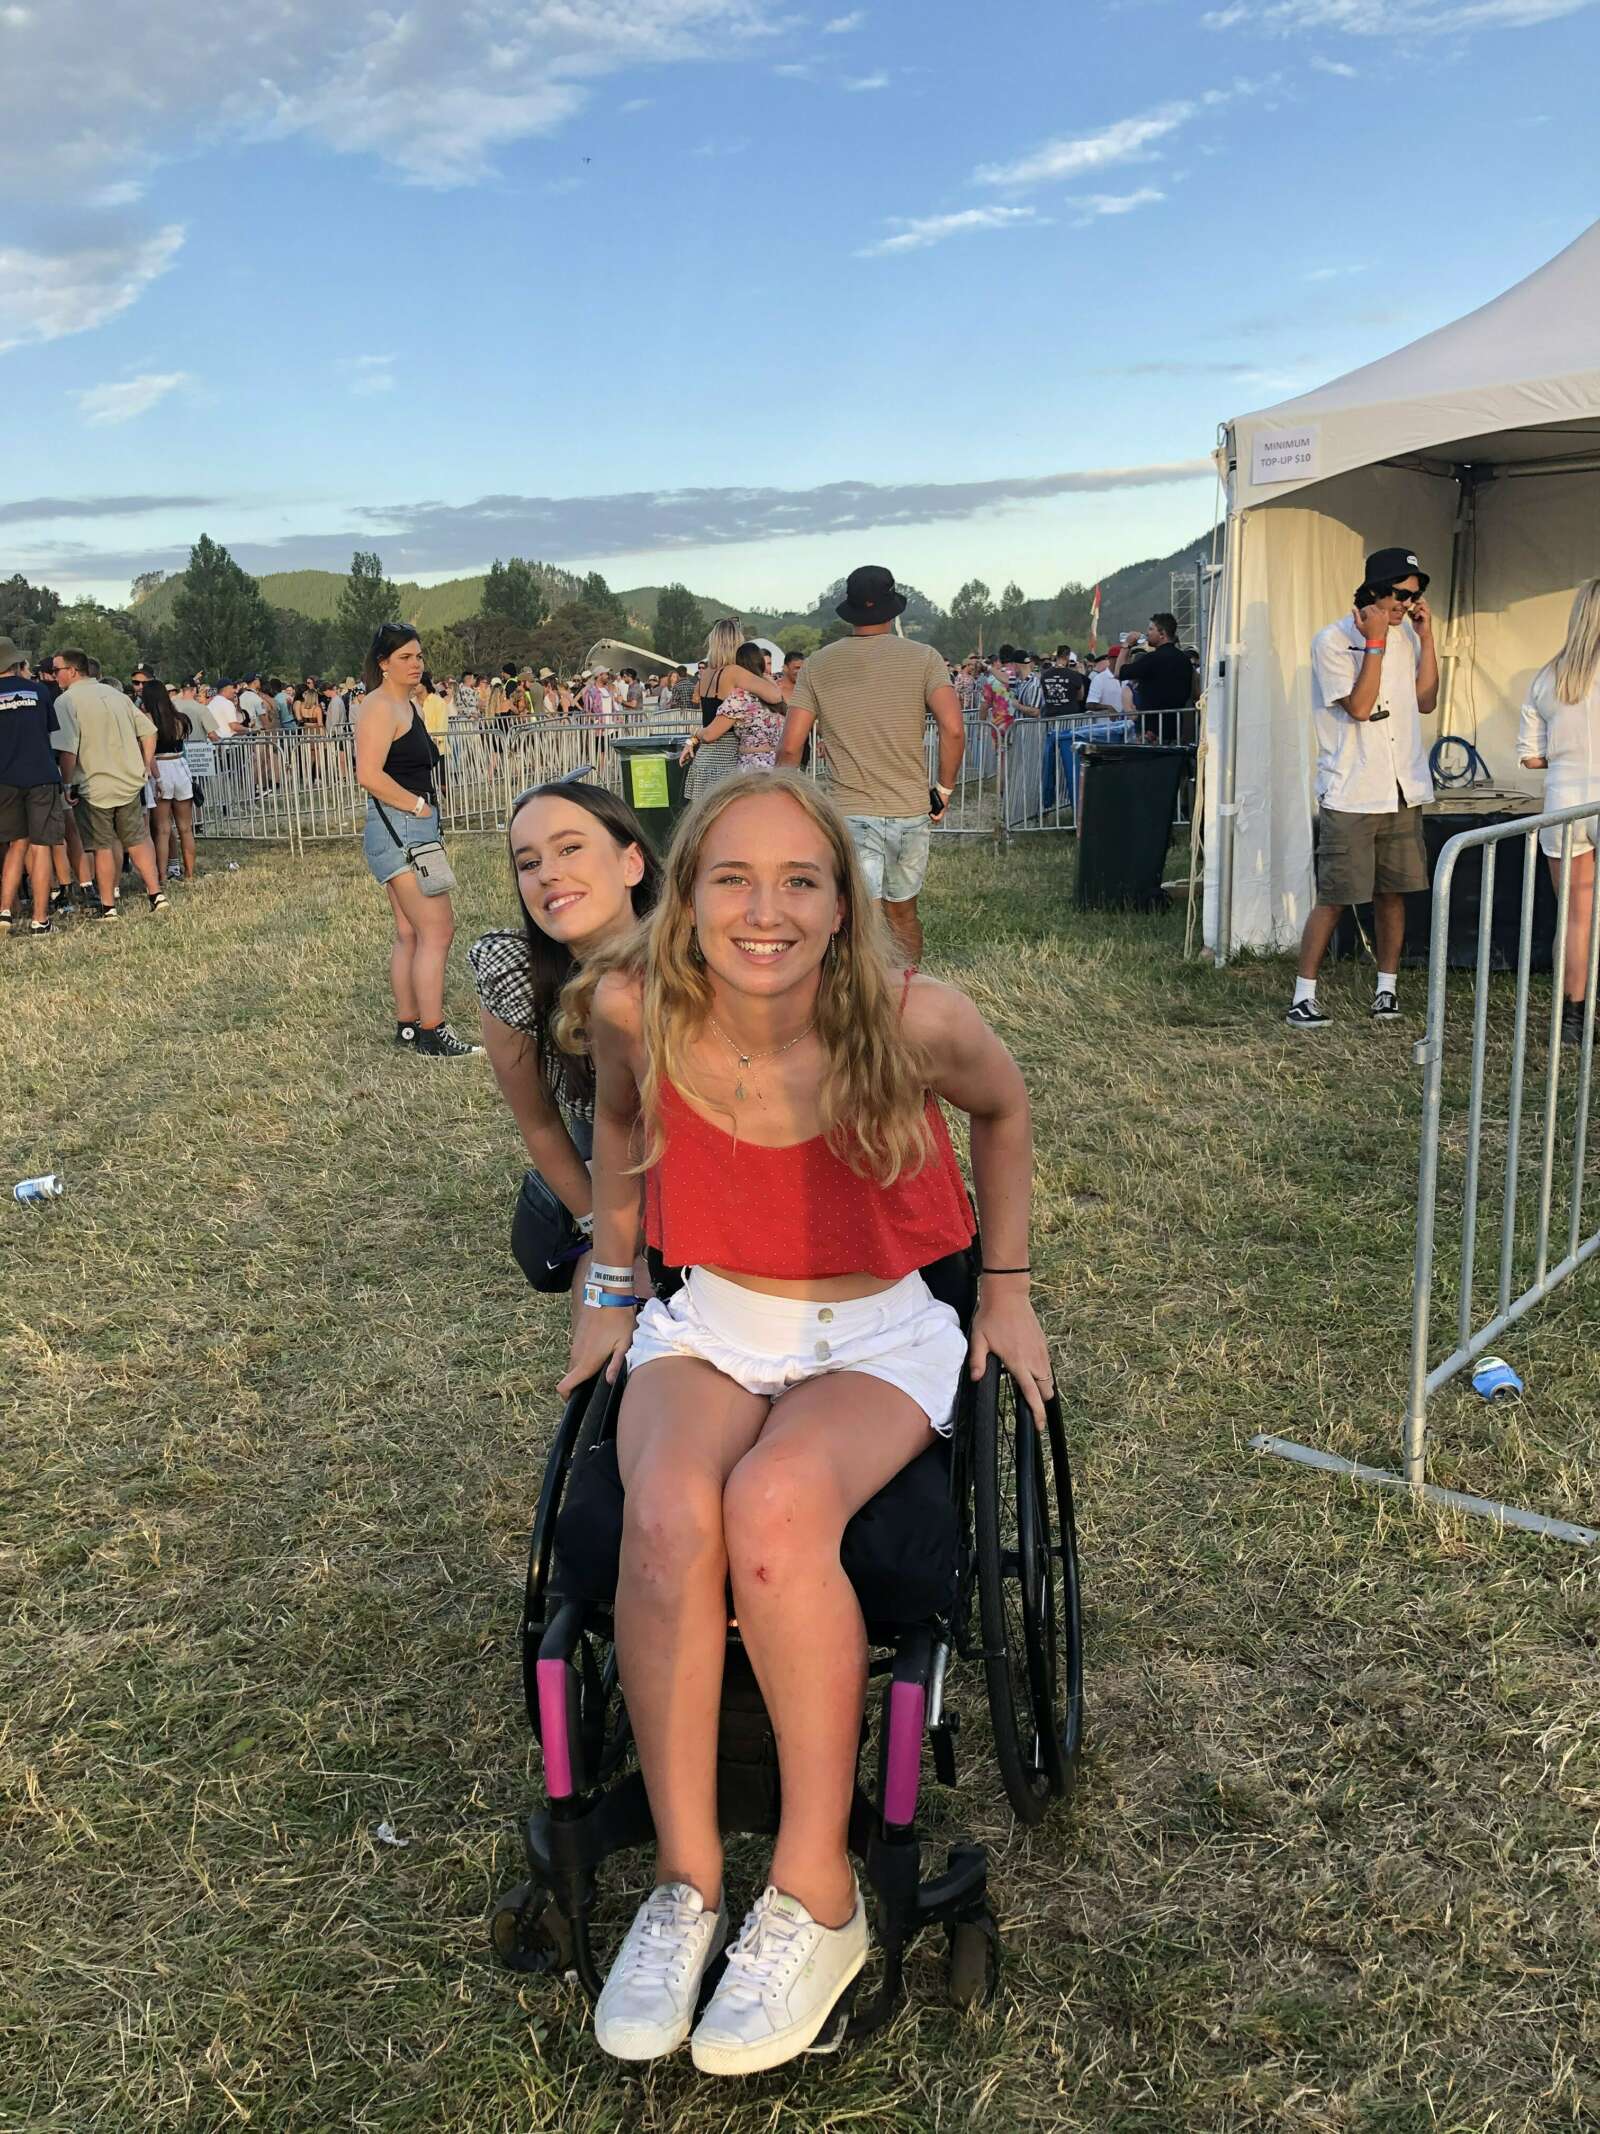 Pieta and her friend together at a festival